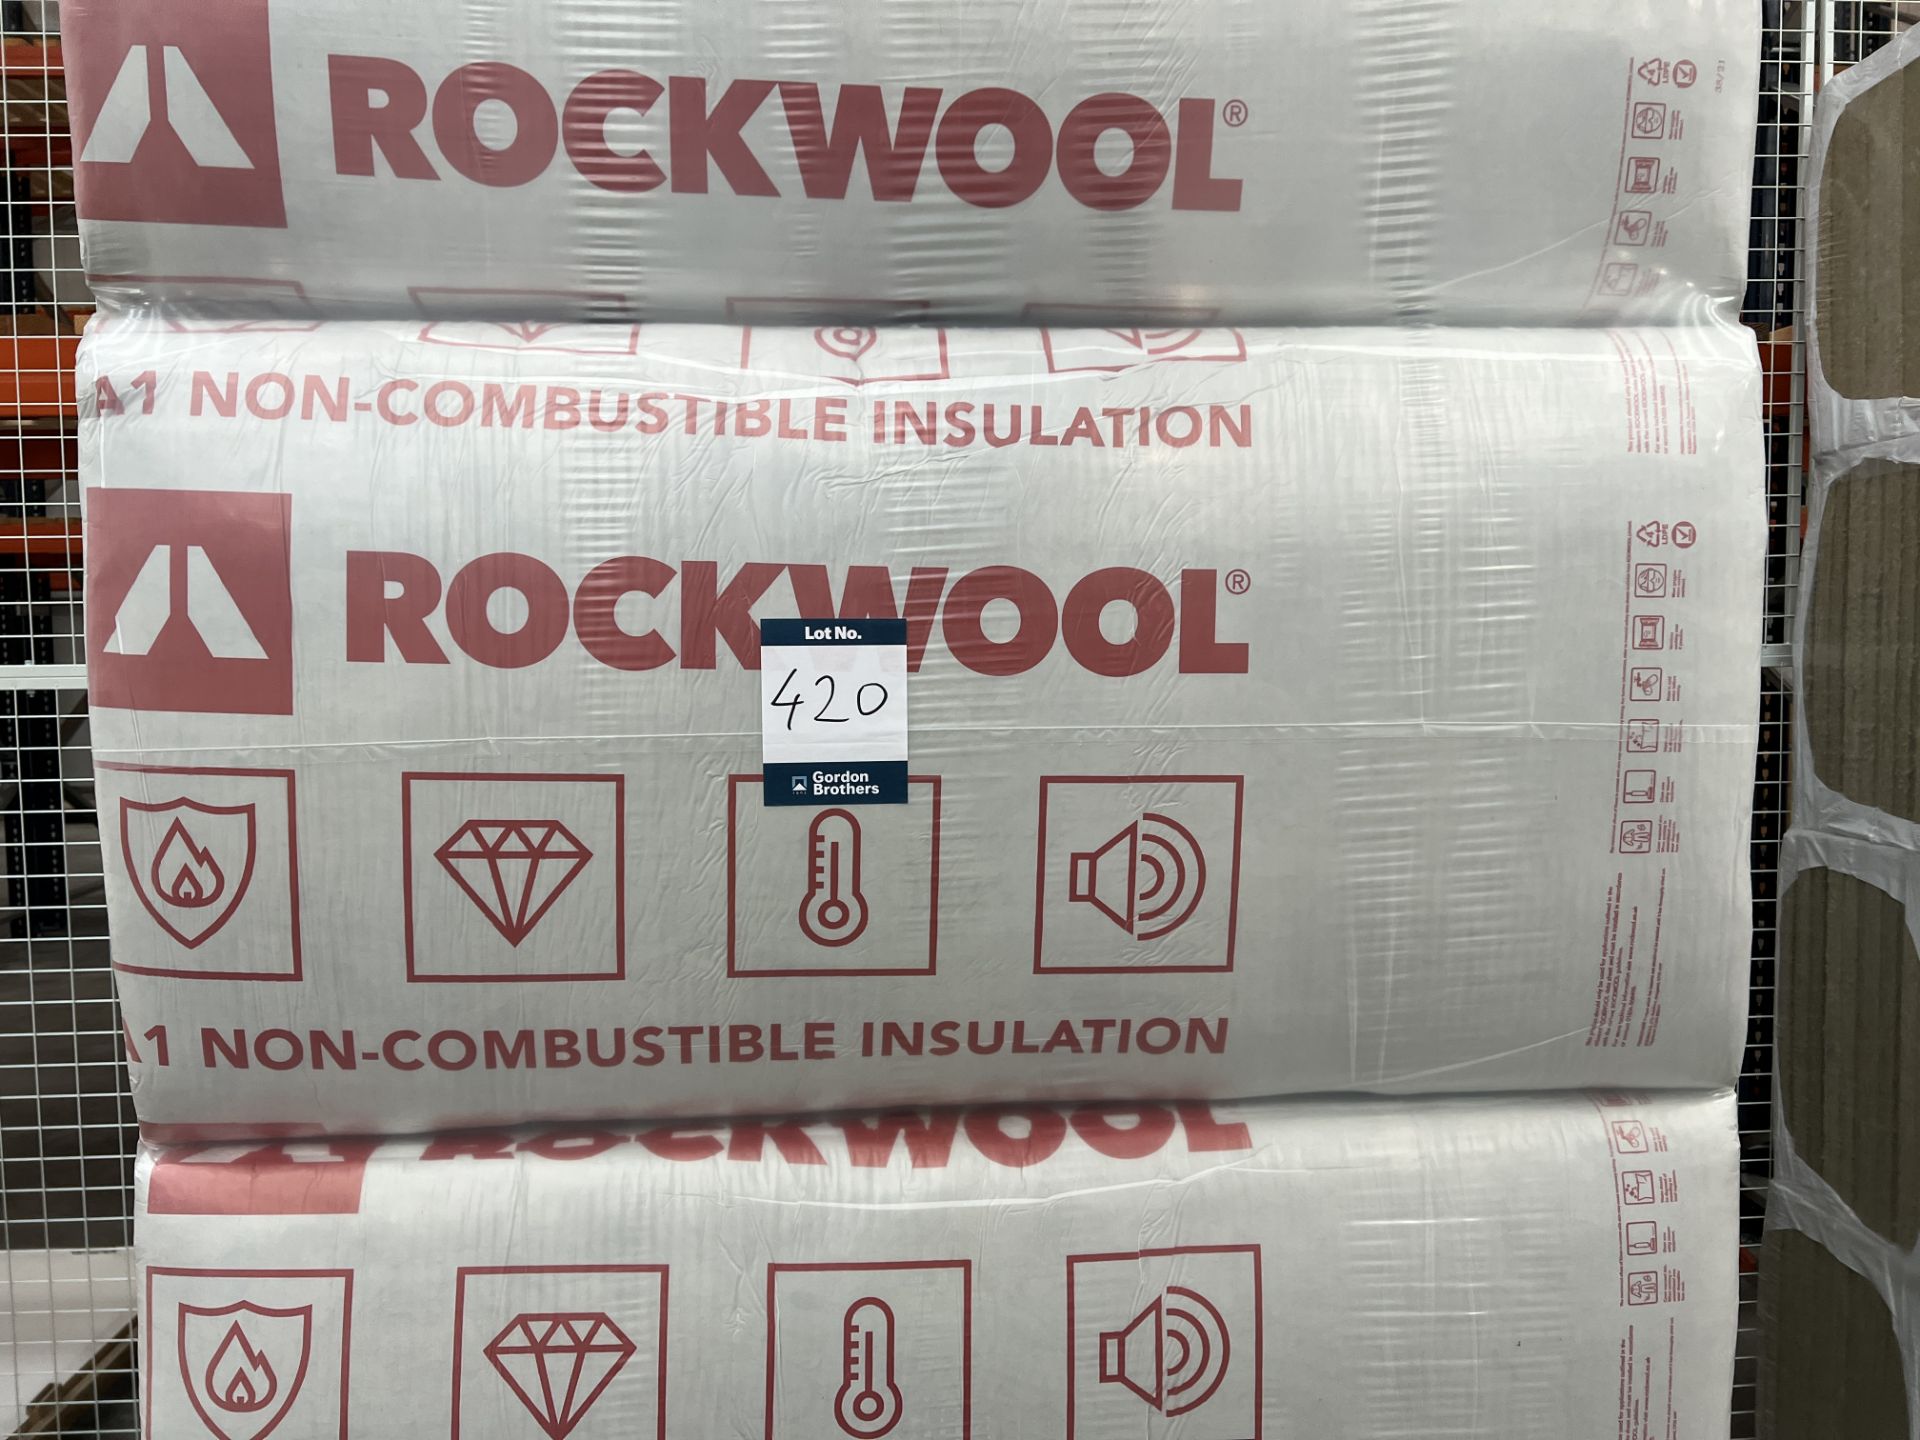 Rockwool RW3 30mm x 600mm x 1200 x 12 A1 non combustible insulation slabs per pack, Qty 12 packs ( - Image 3 of 4